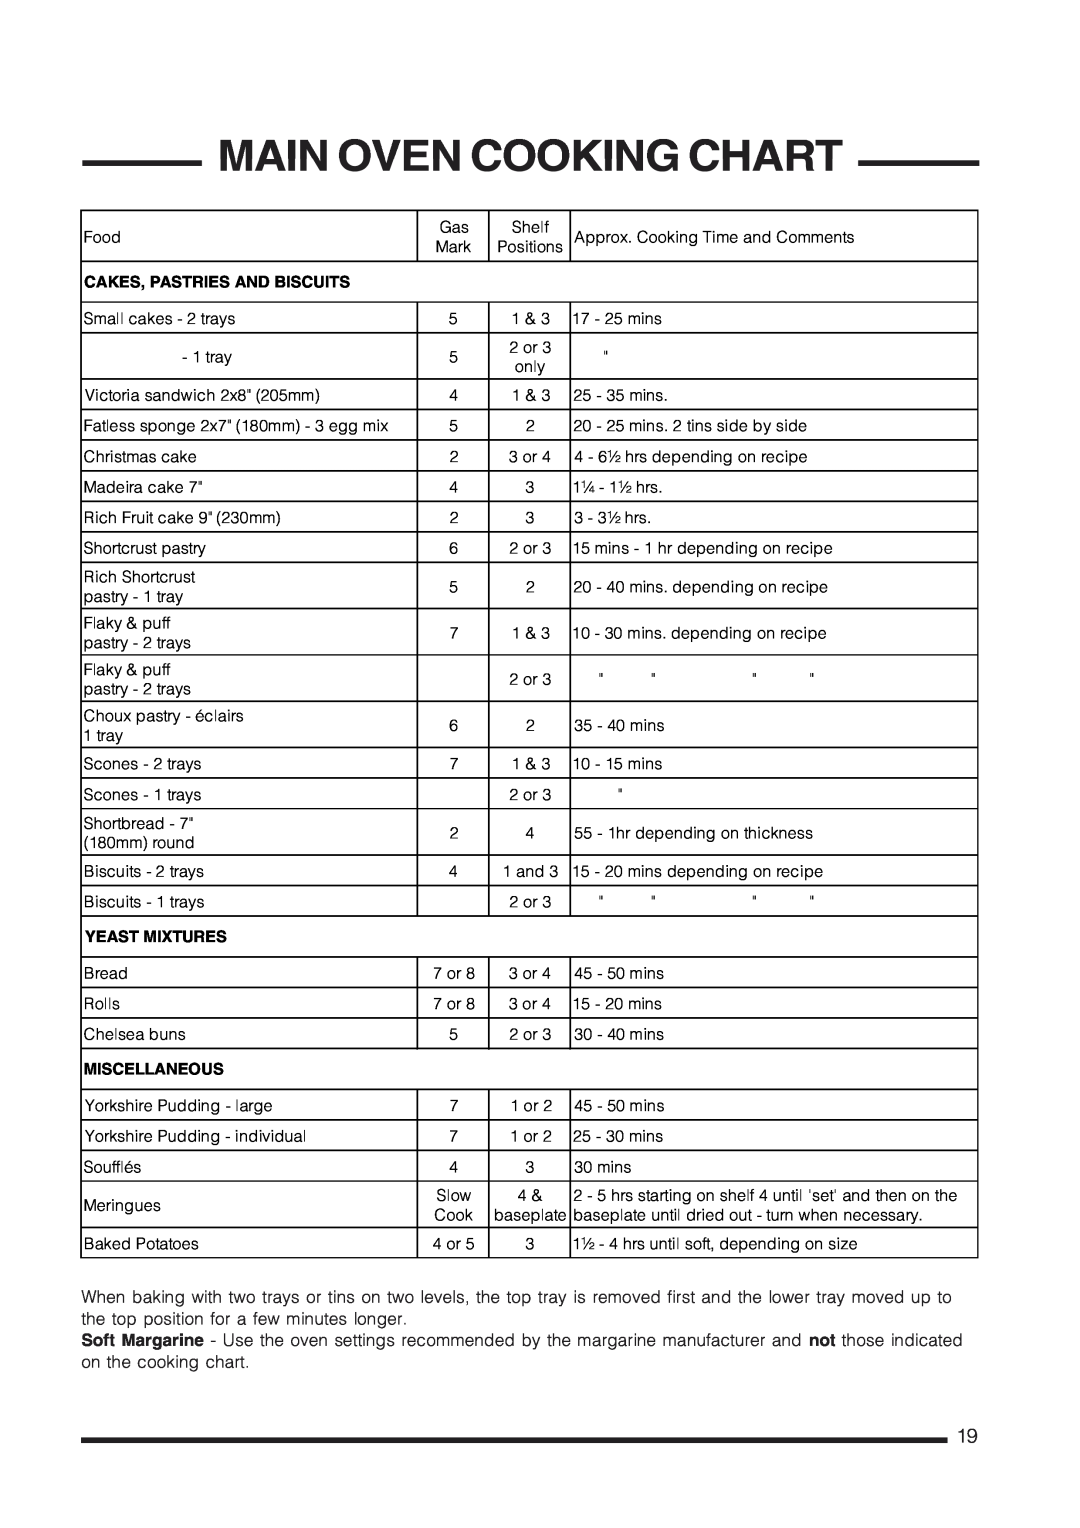 Cannon C60GCB, C60GCW, C60GCS, C60GCK Main Oven Cooking Chart, Cakes, Pastries And Biscuits, Yeast Mixtures, Miscellaneous 